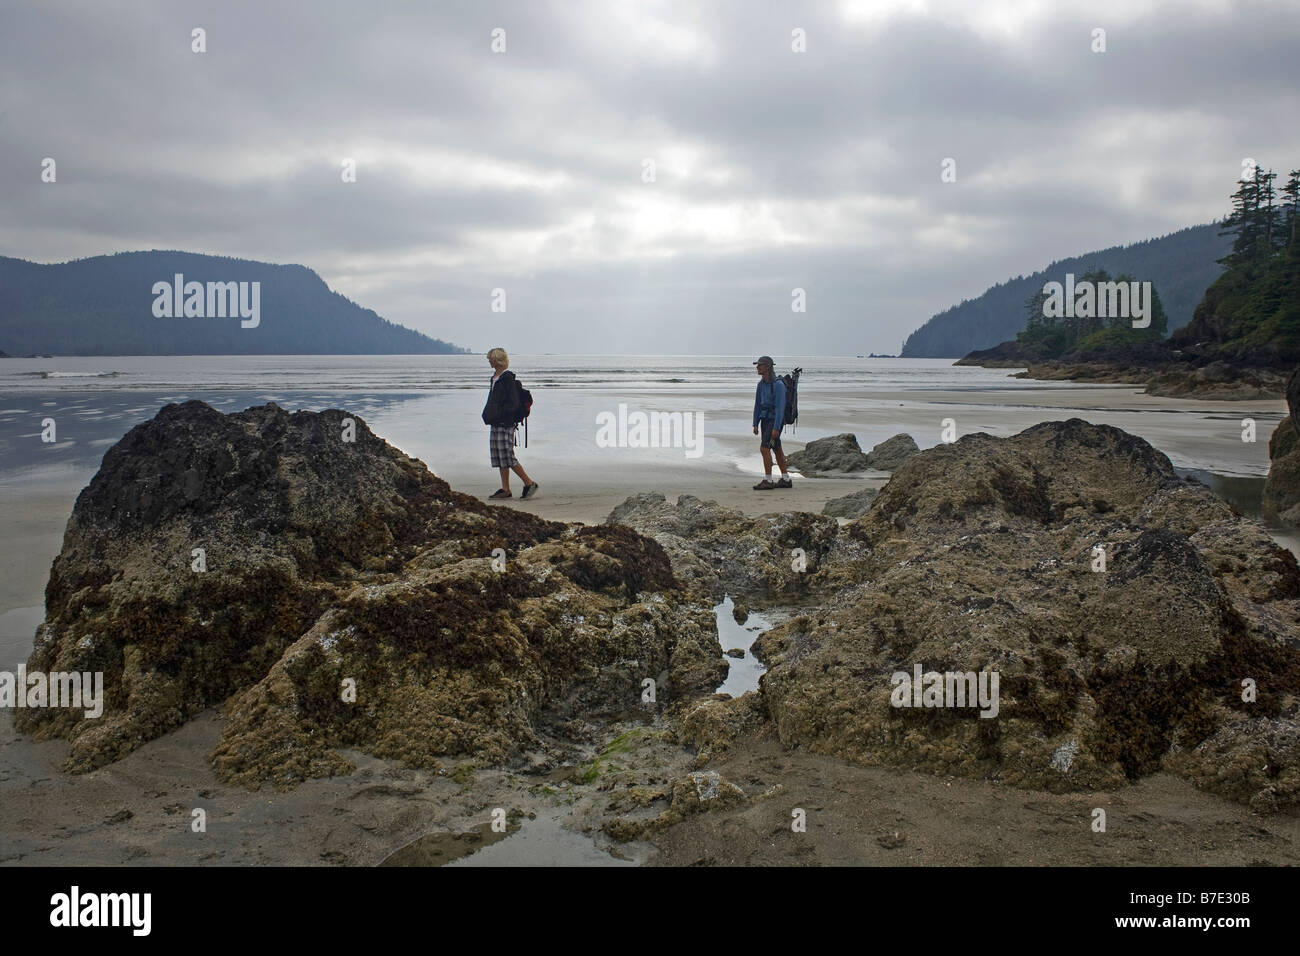 BRITISH COLUMBIA - Hikers exploring San Josef Bay on the northern tip of Vancouver Island in Cape Scott Provincial Park. Stock Photo